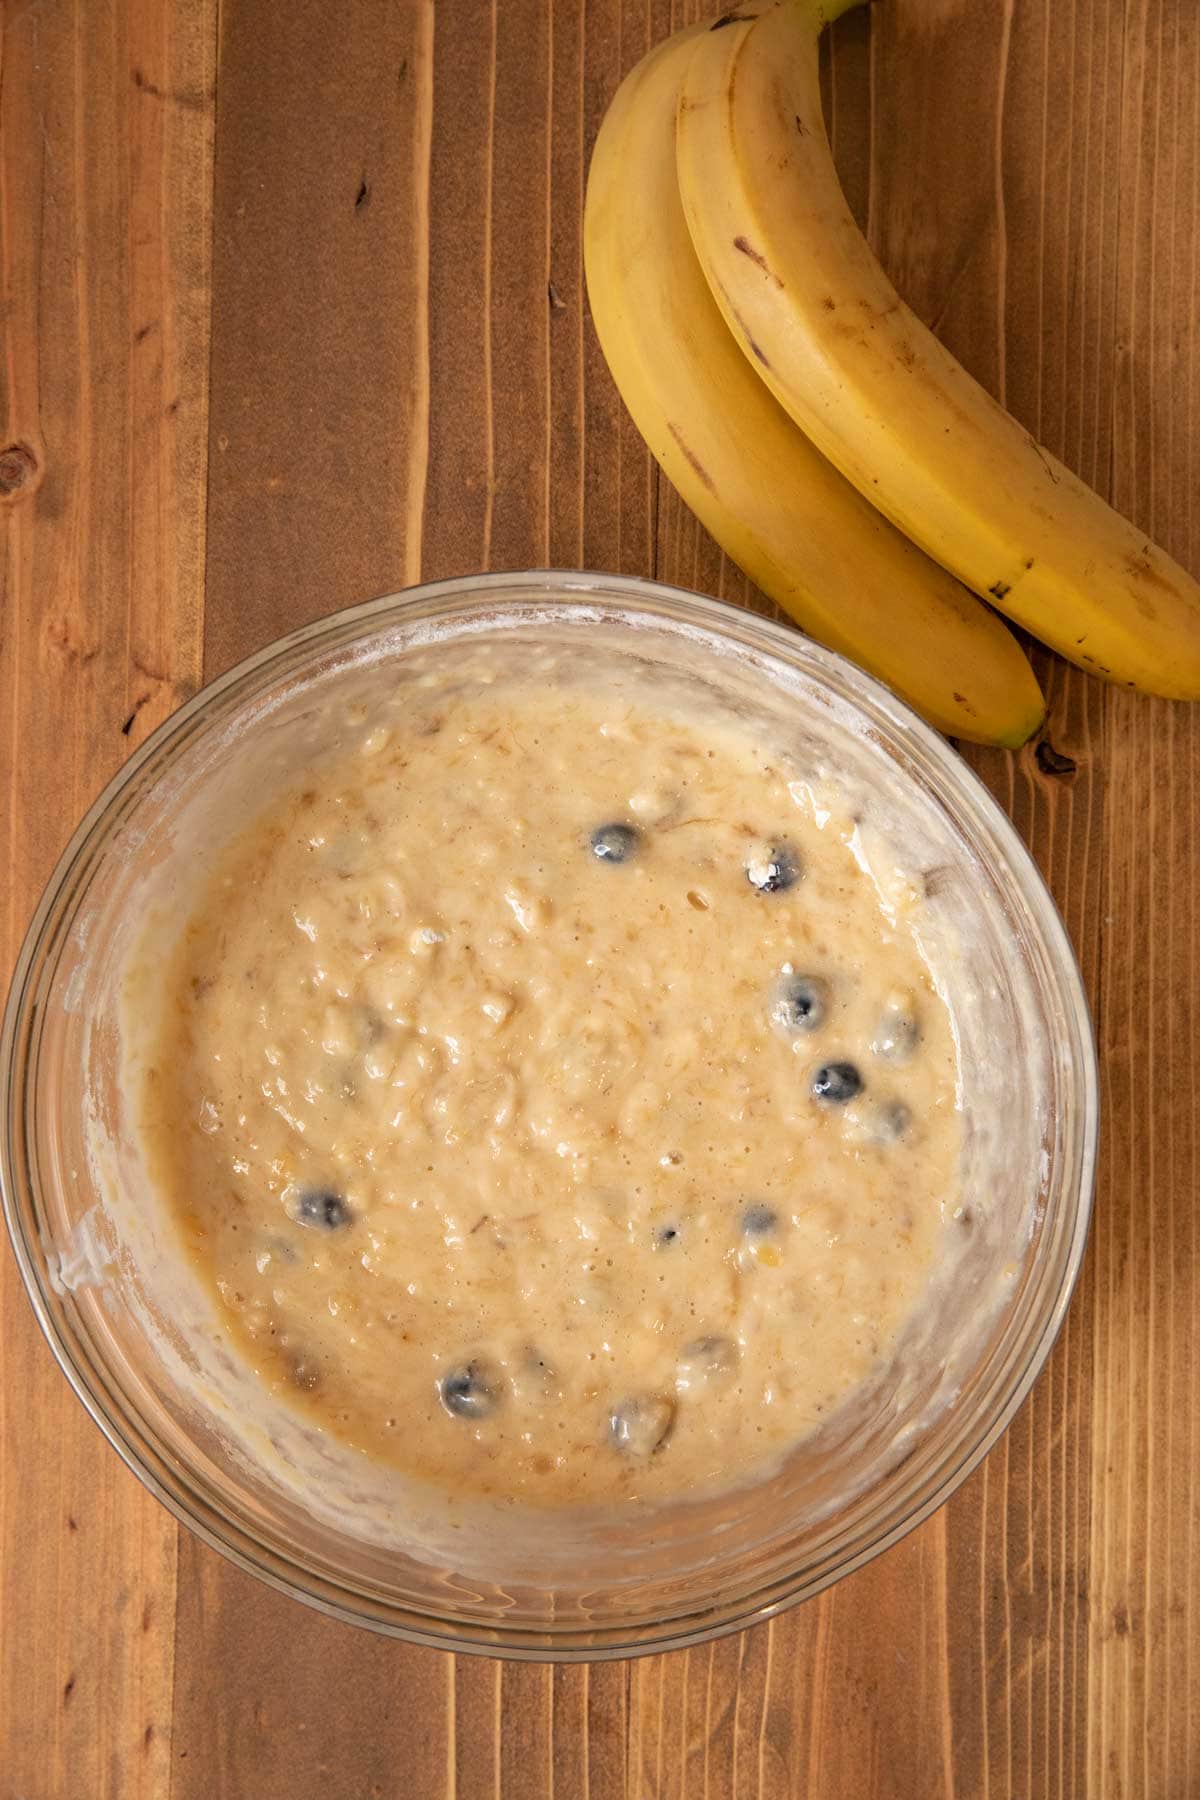 Blueberry Banana Bread batter in mixing bowl